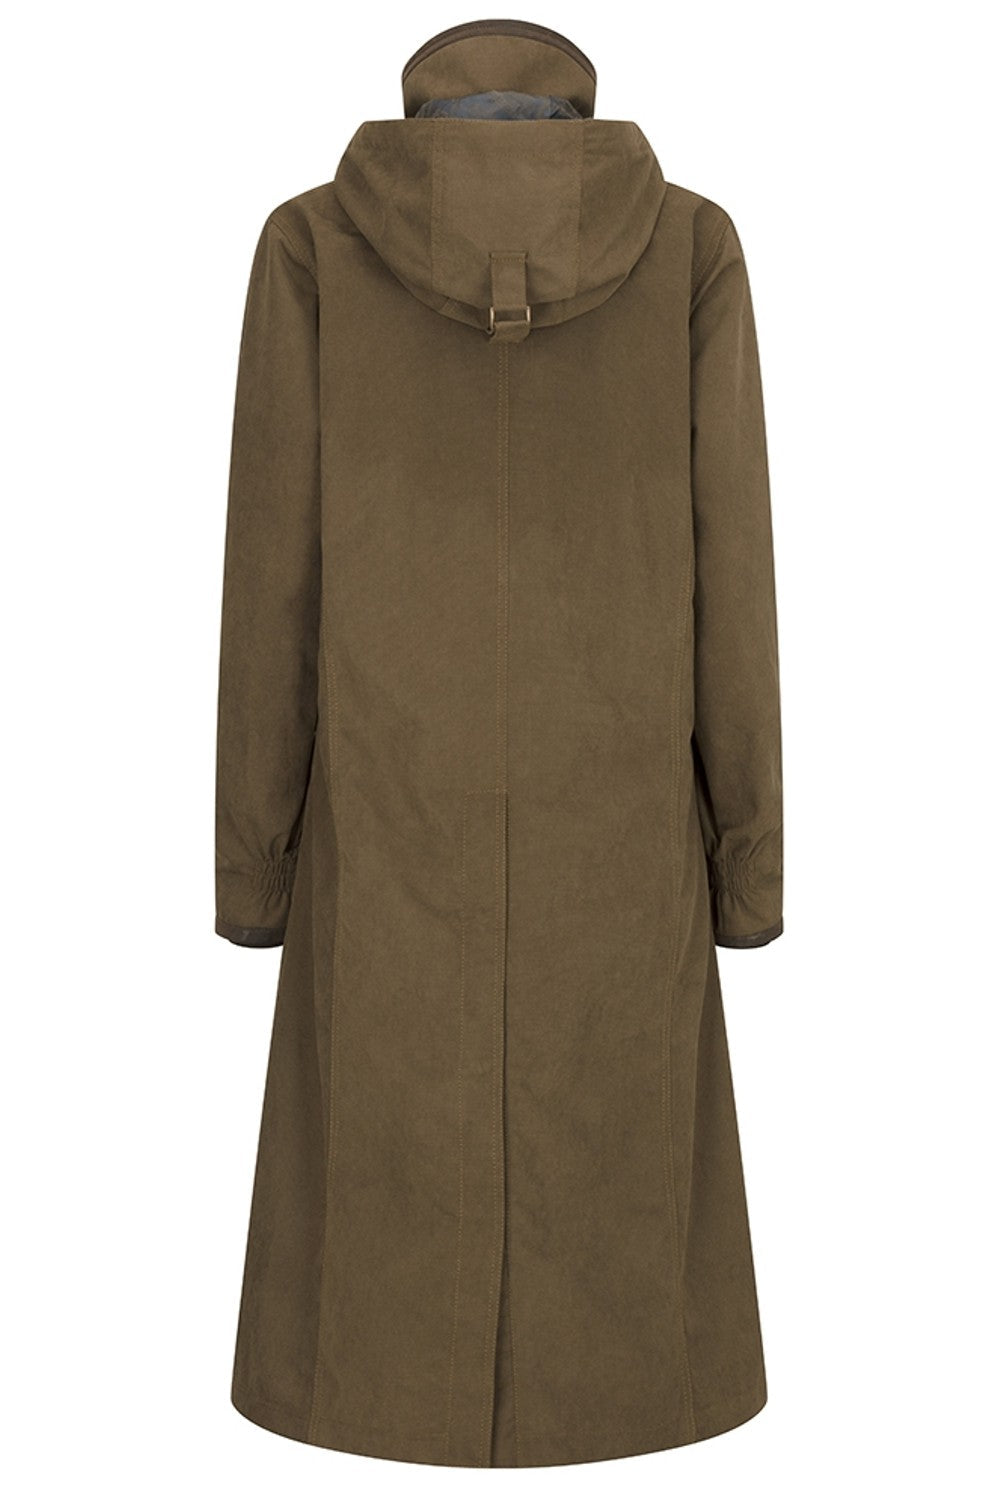 Hoggs of Fife Struther Ladies Long Riding Coat in Sage 